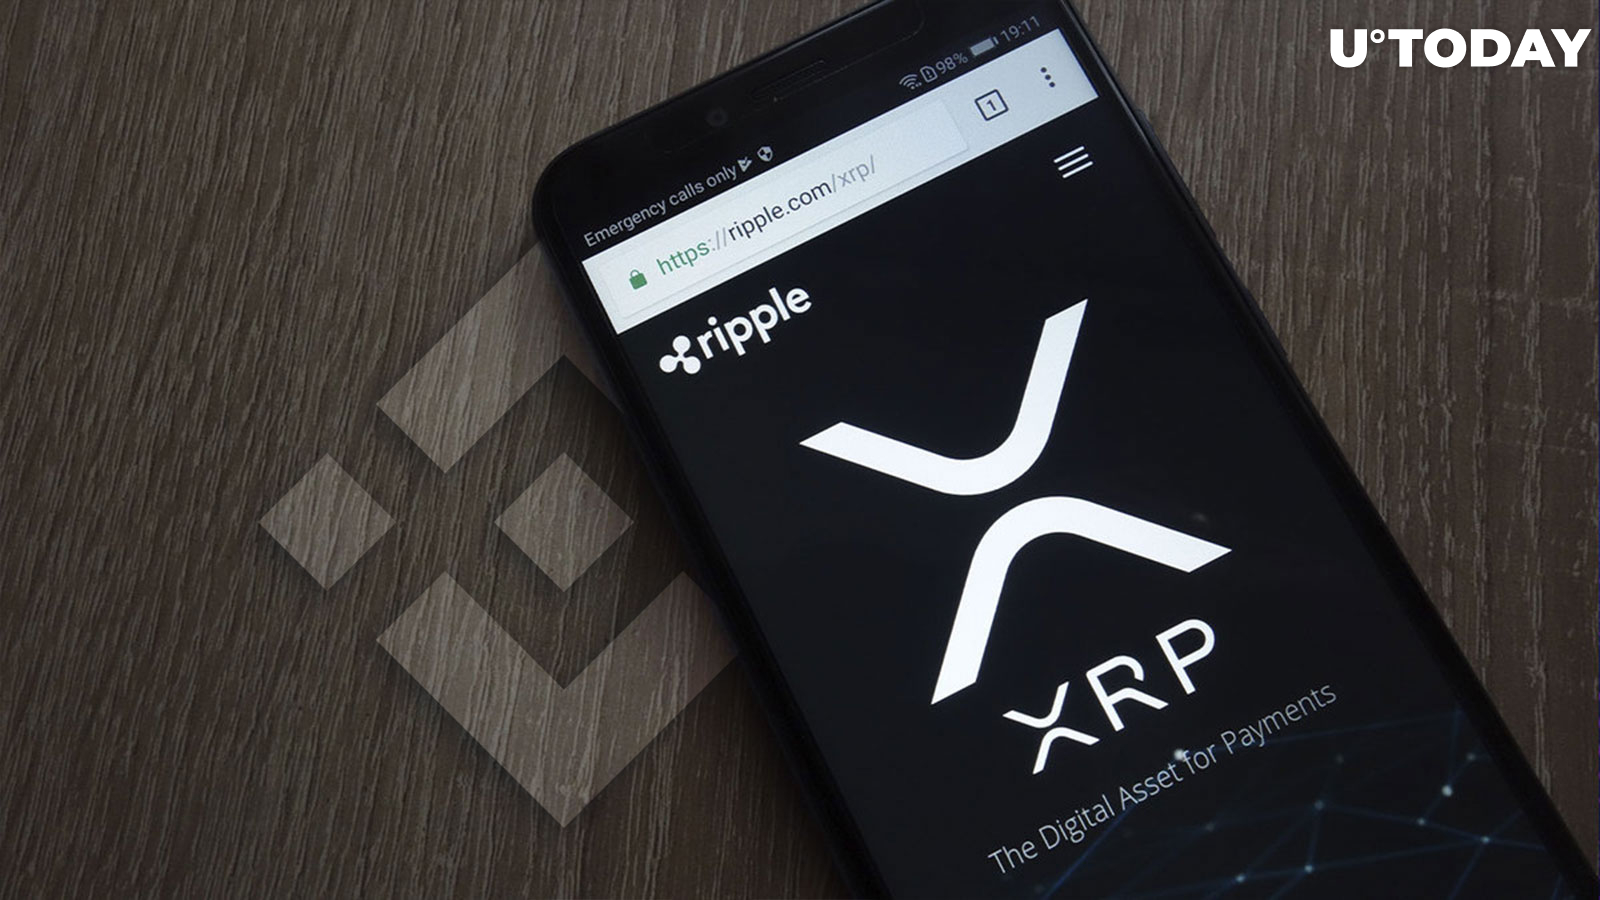 Two XRP Pairs Delisted From Binance: Here's What Happened